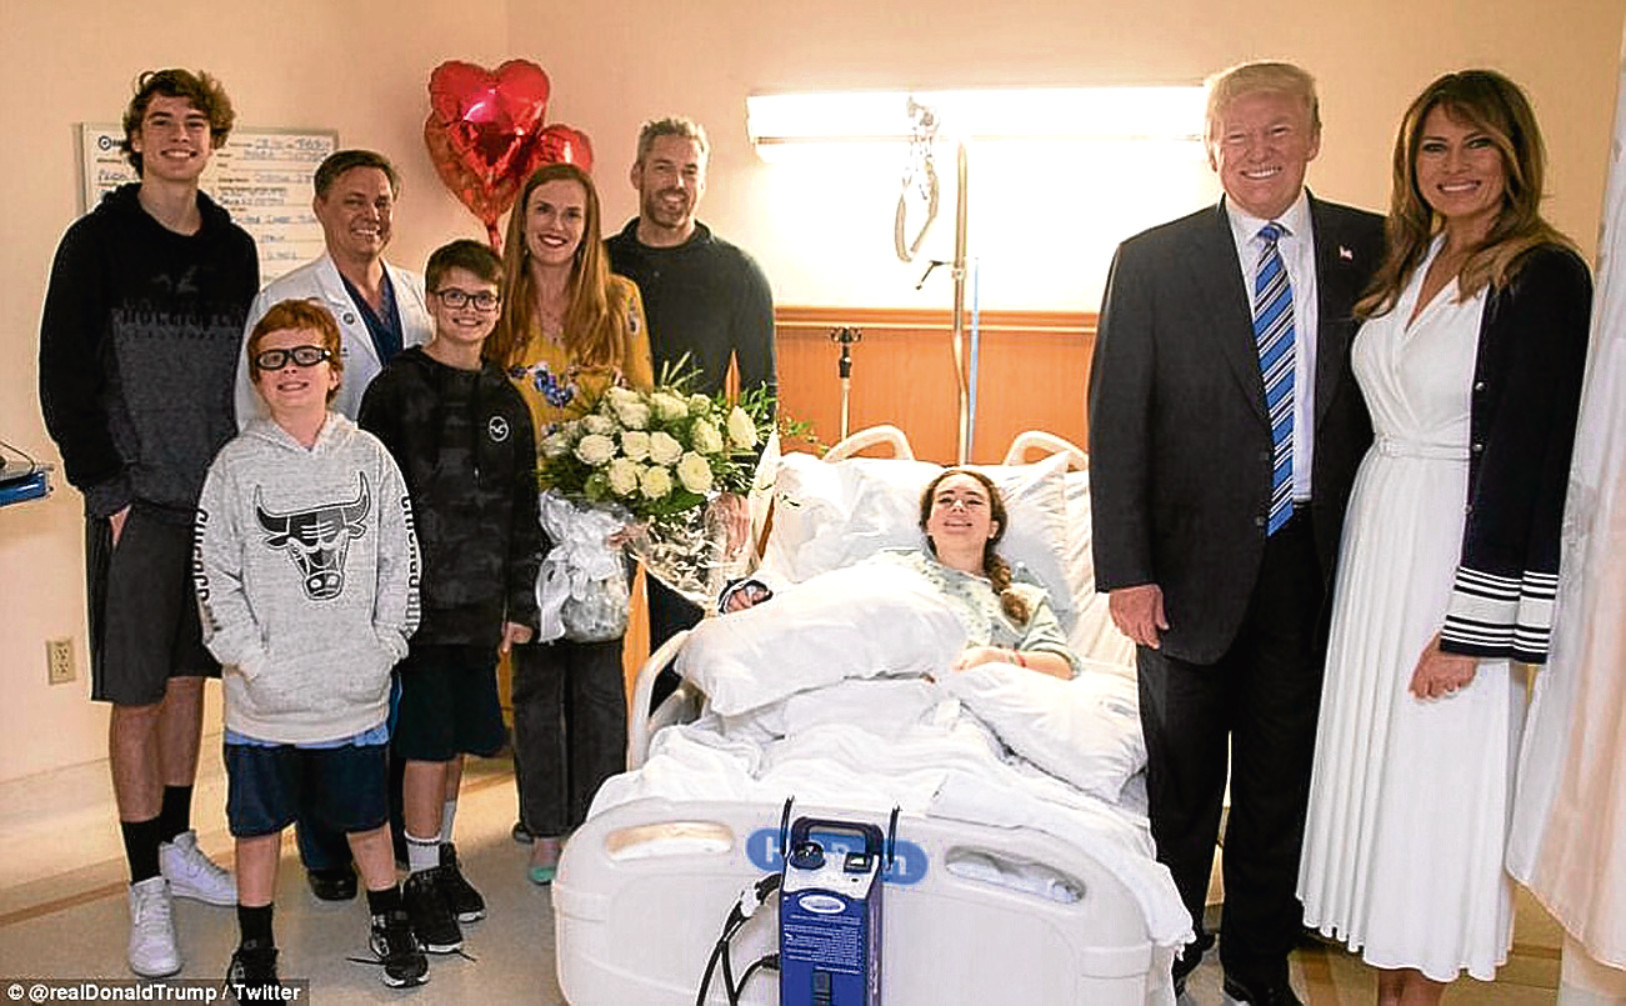 The president shared images from his visit to a Florida hospital where victims are still recovering after a gunman, armed with an AR-15 rifle, slaughtered 14 students and three teachers Wednesday. (Twitter)